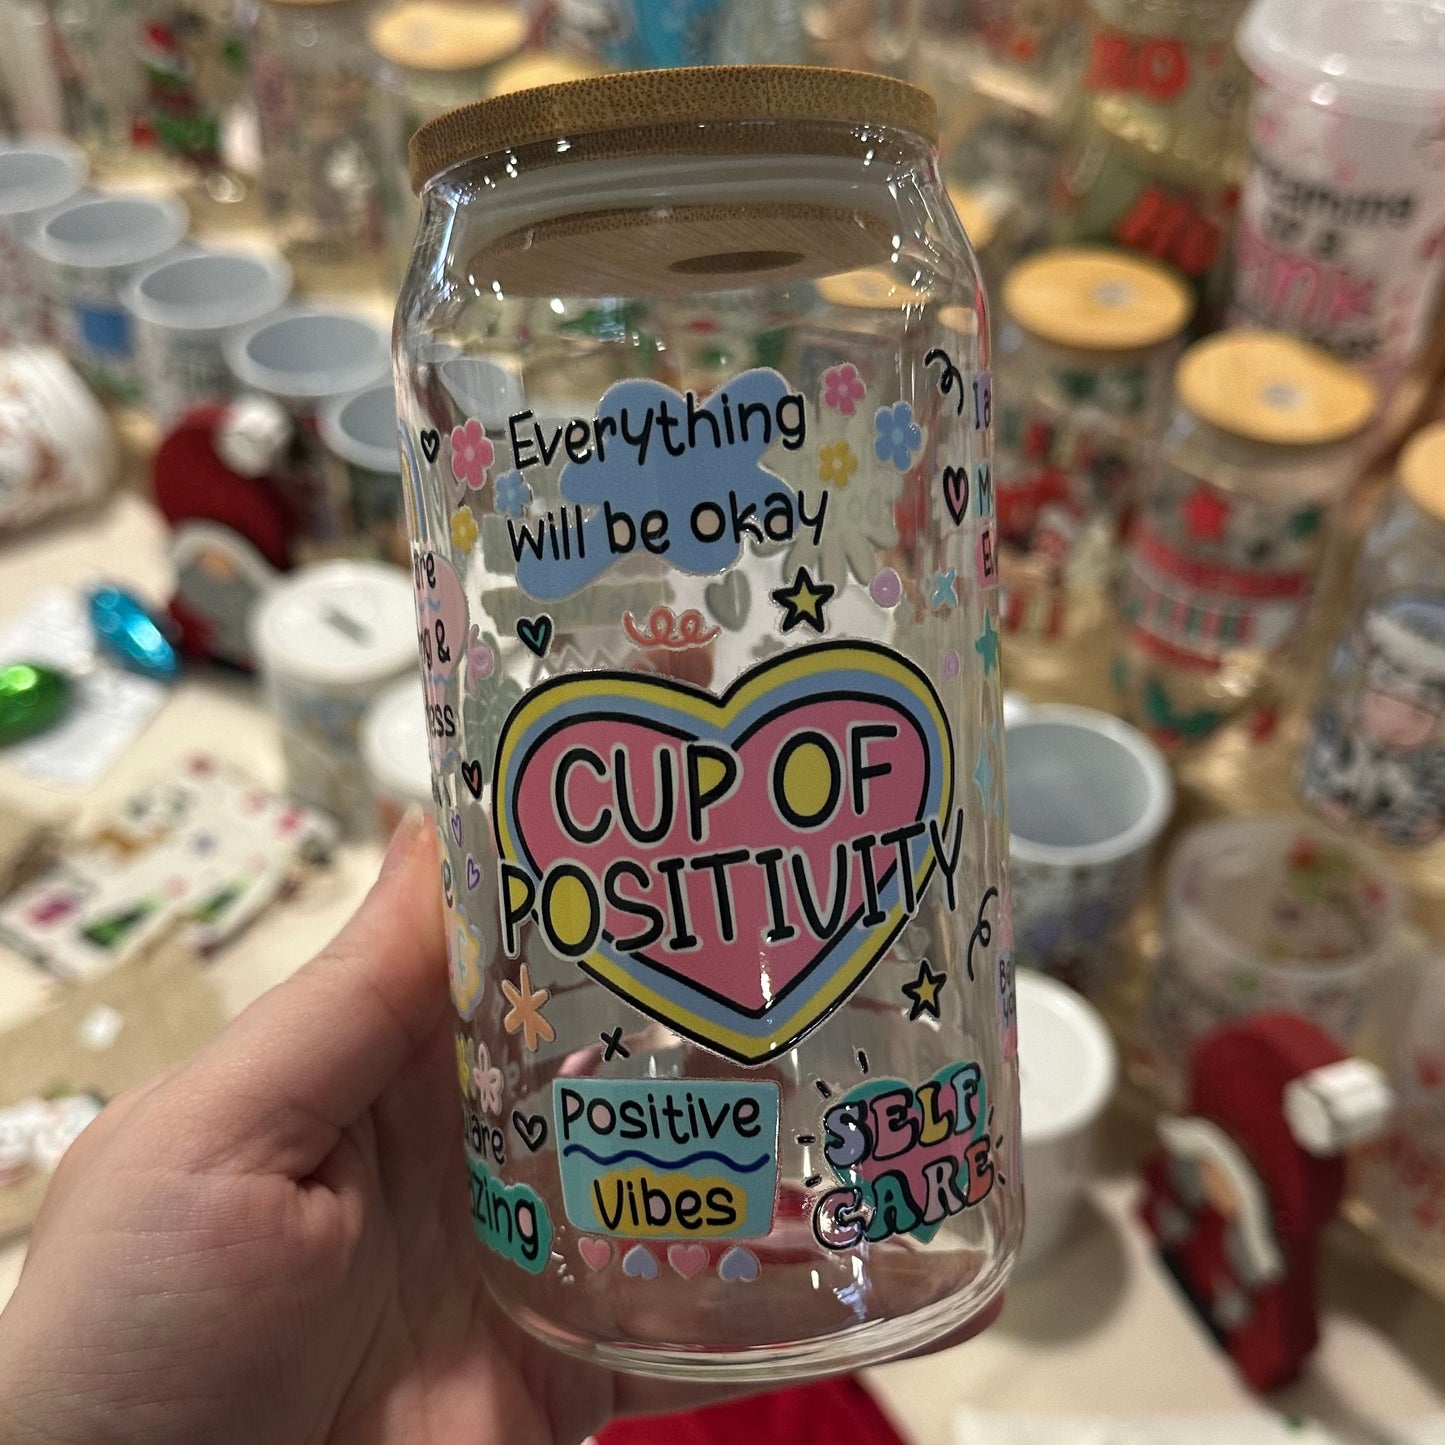 Cup of Positivity glass can